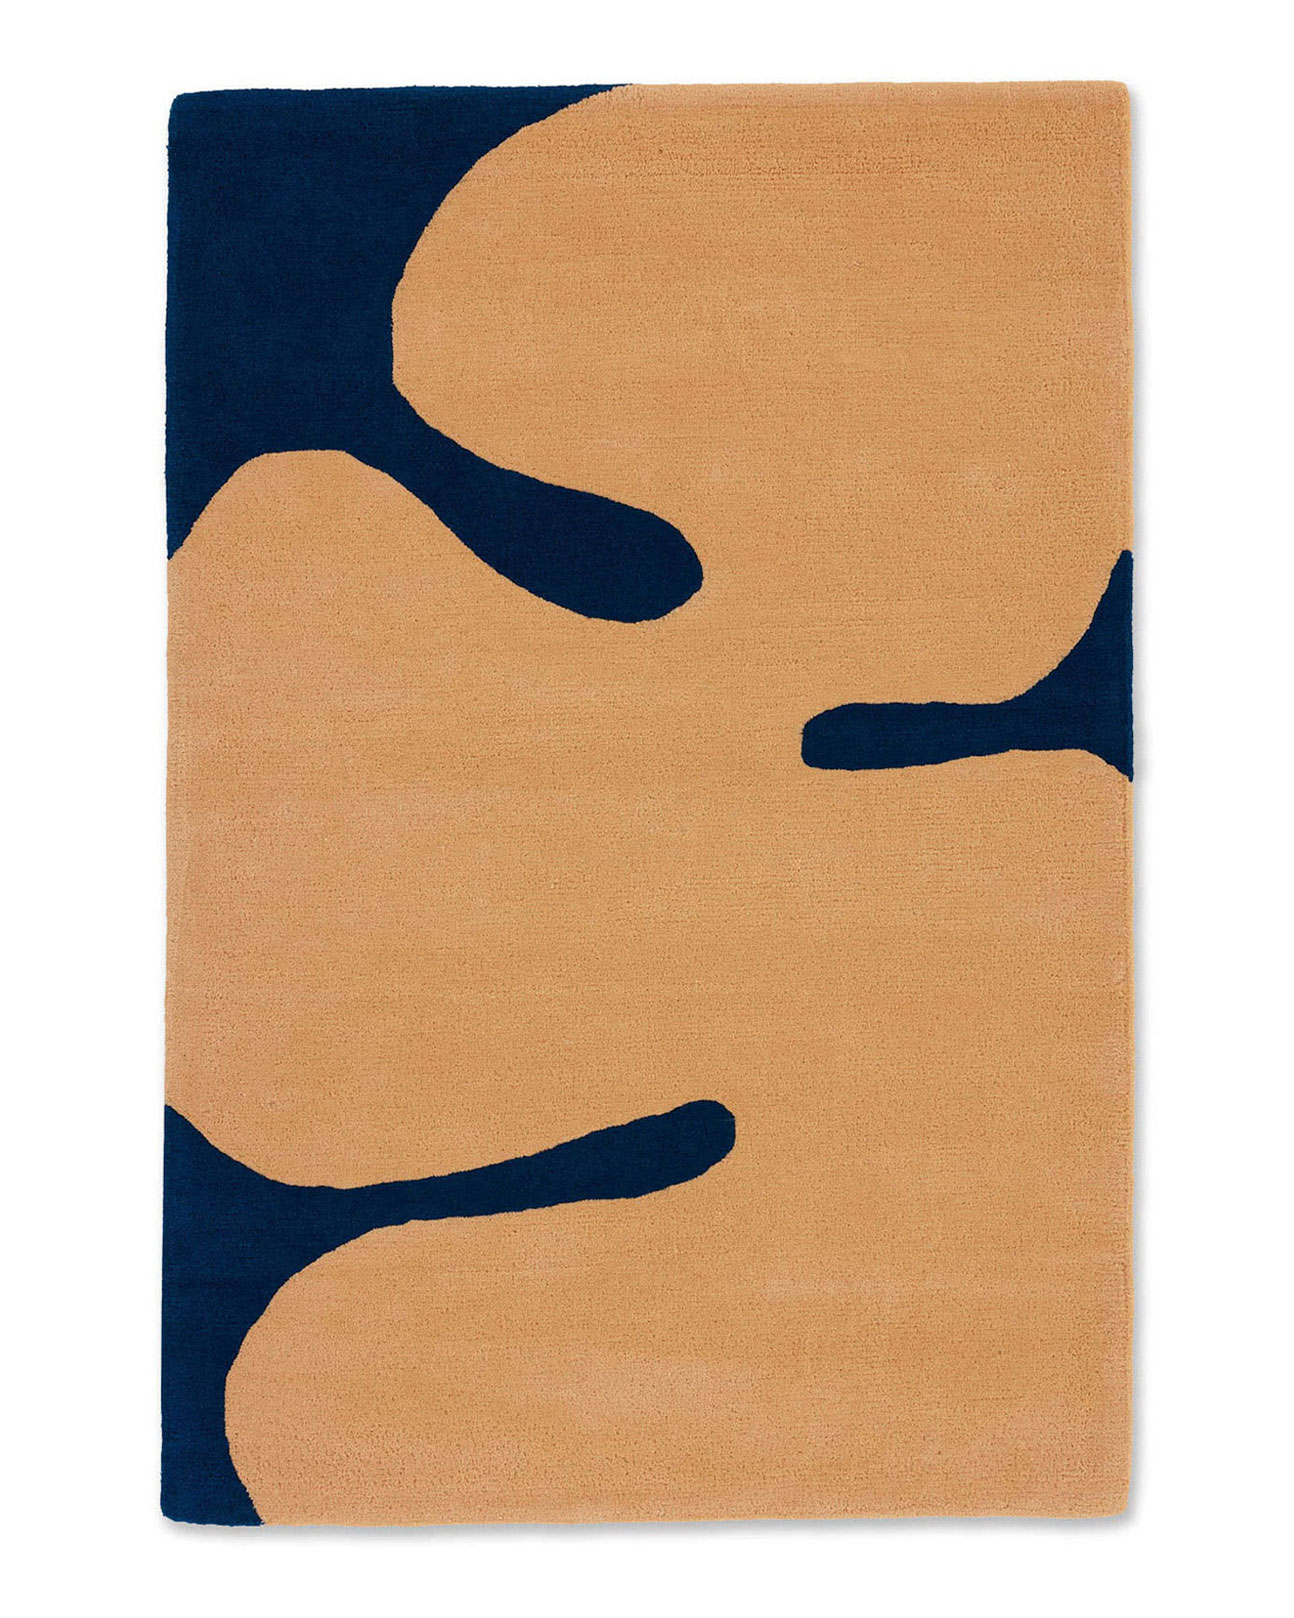 Navy plush luxury rug with a rounded organic peach shape in the center.